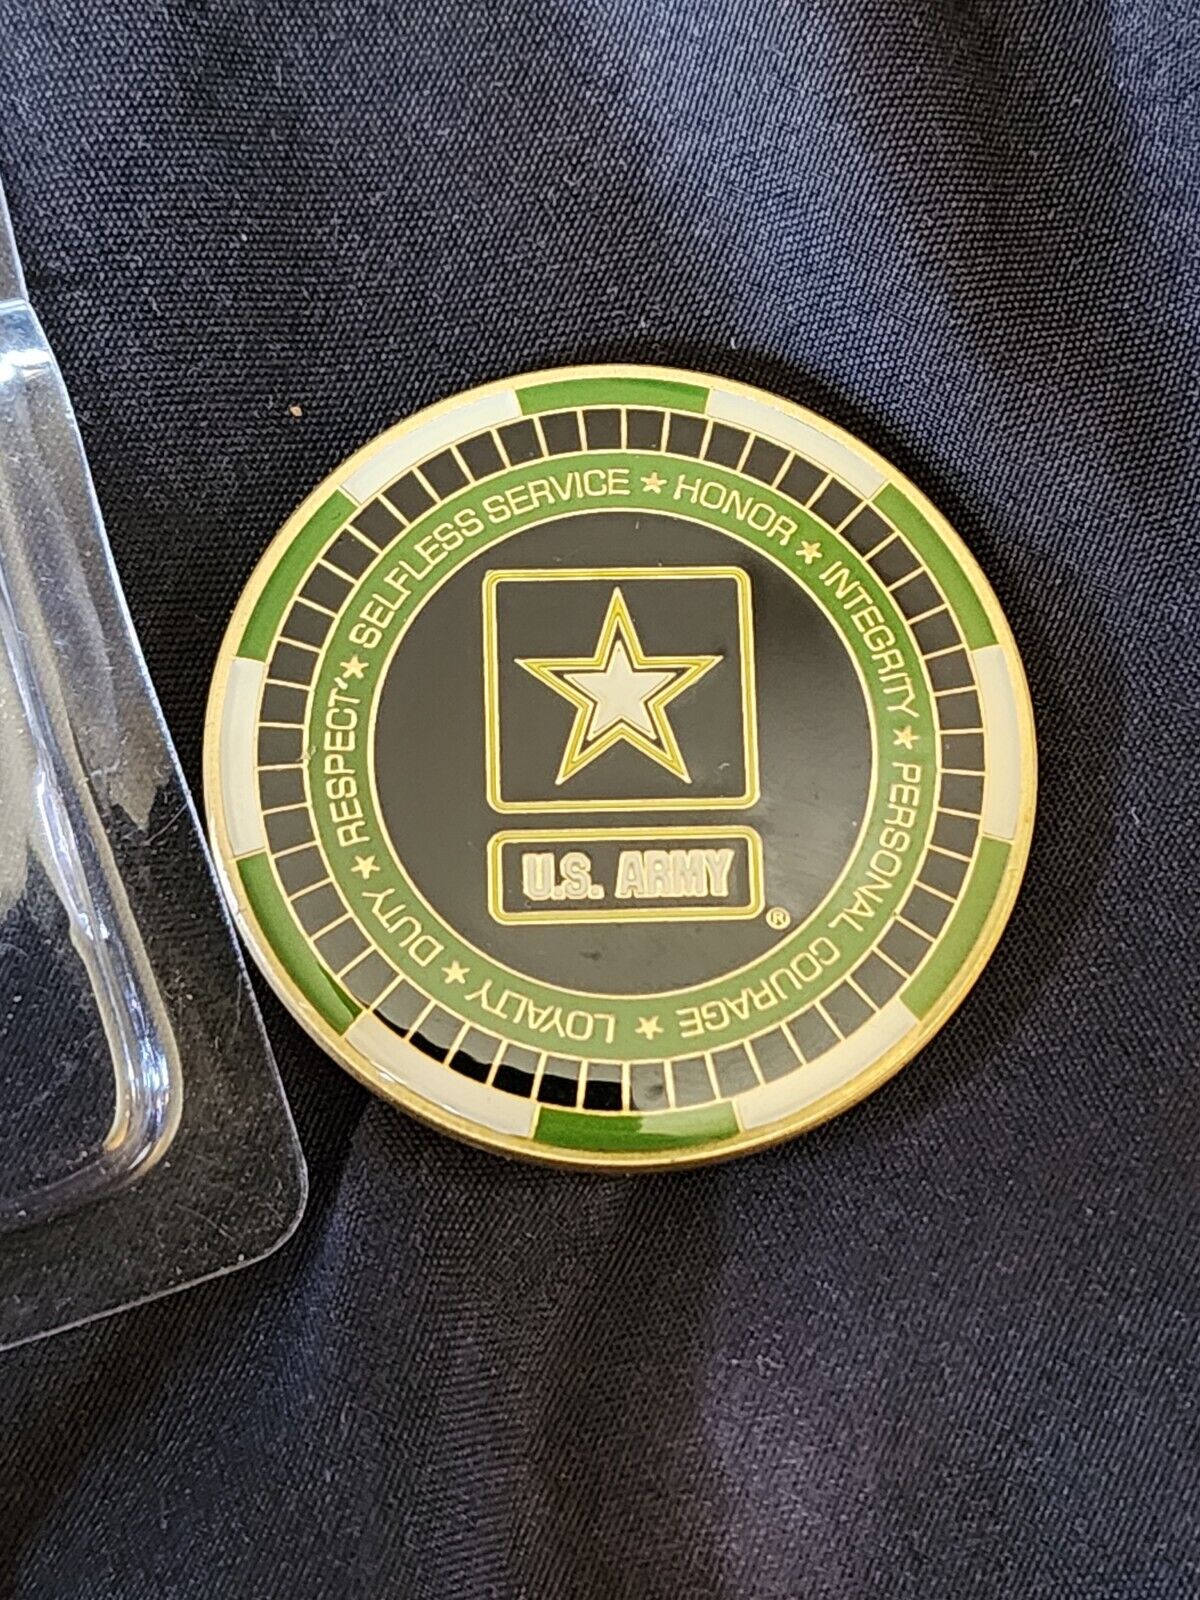 * Selfless Service U.S. Army We Make The Odds Challenge Coin